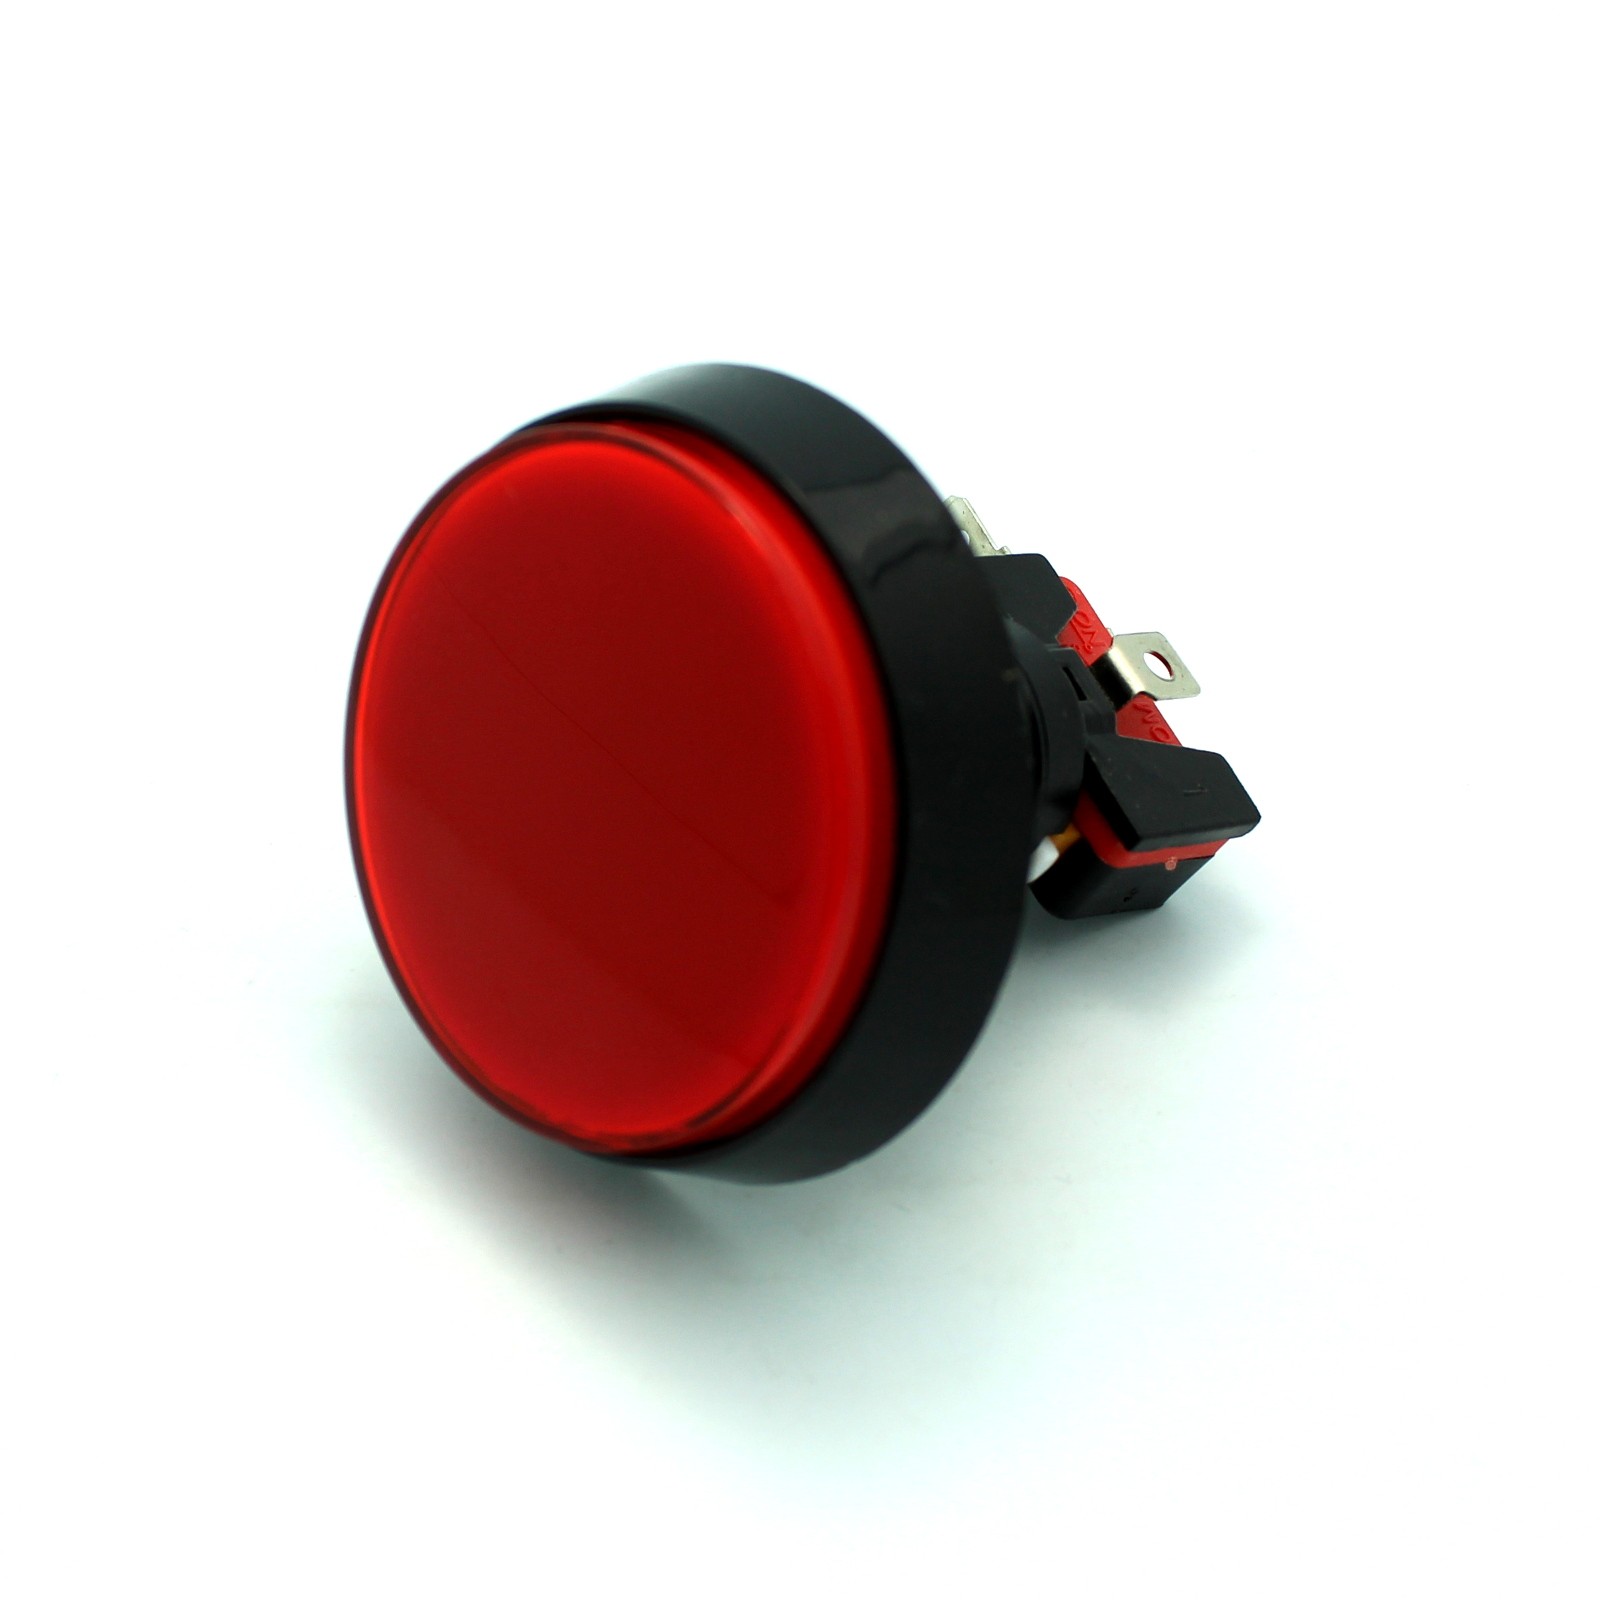 Details about   30mm Mounting Momentary Game Push Button for Video Games Red 5pcs 